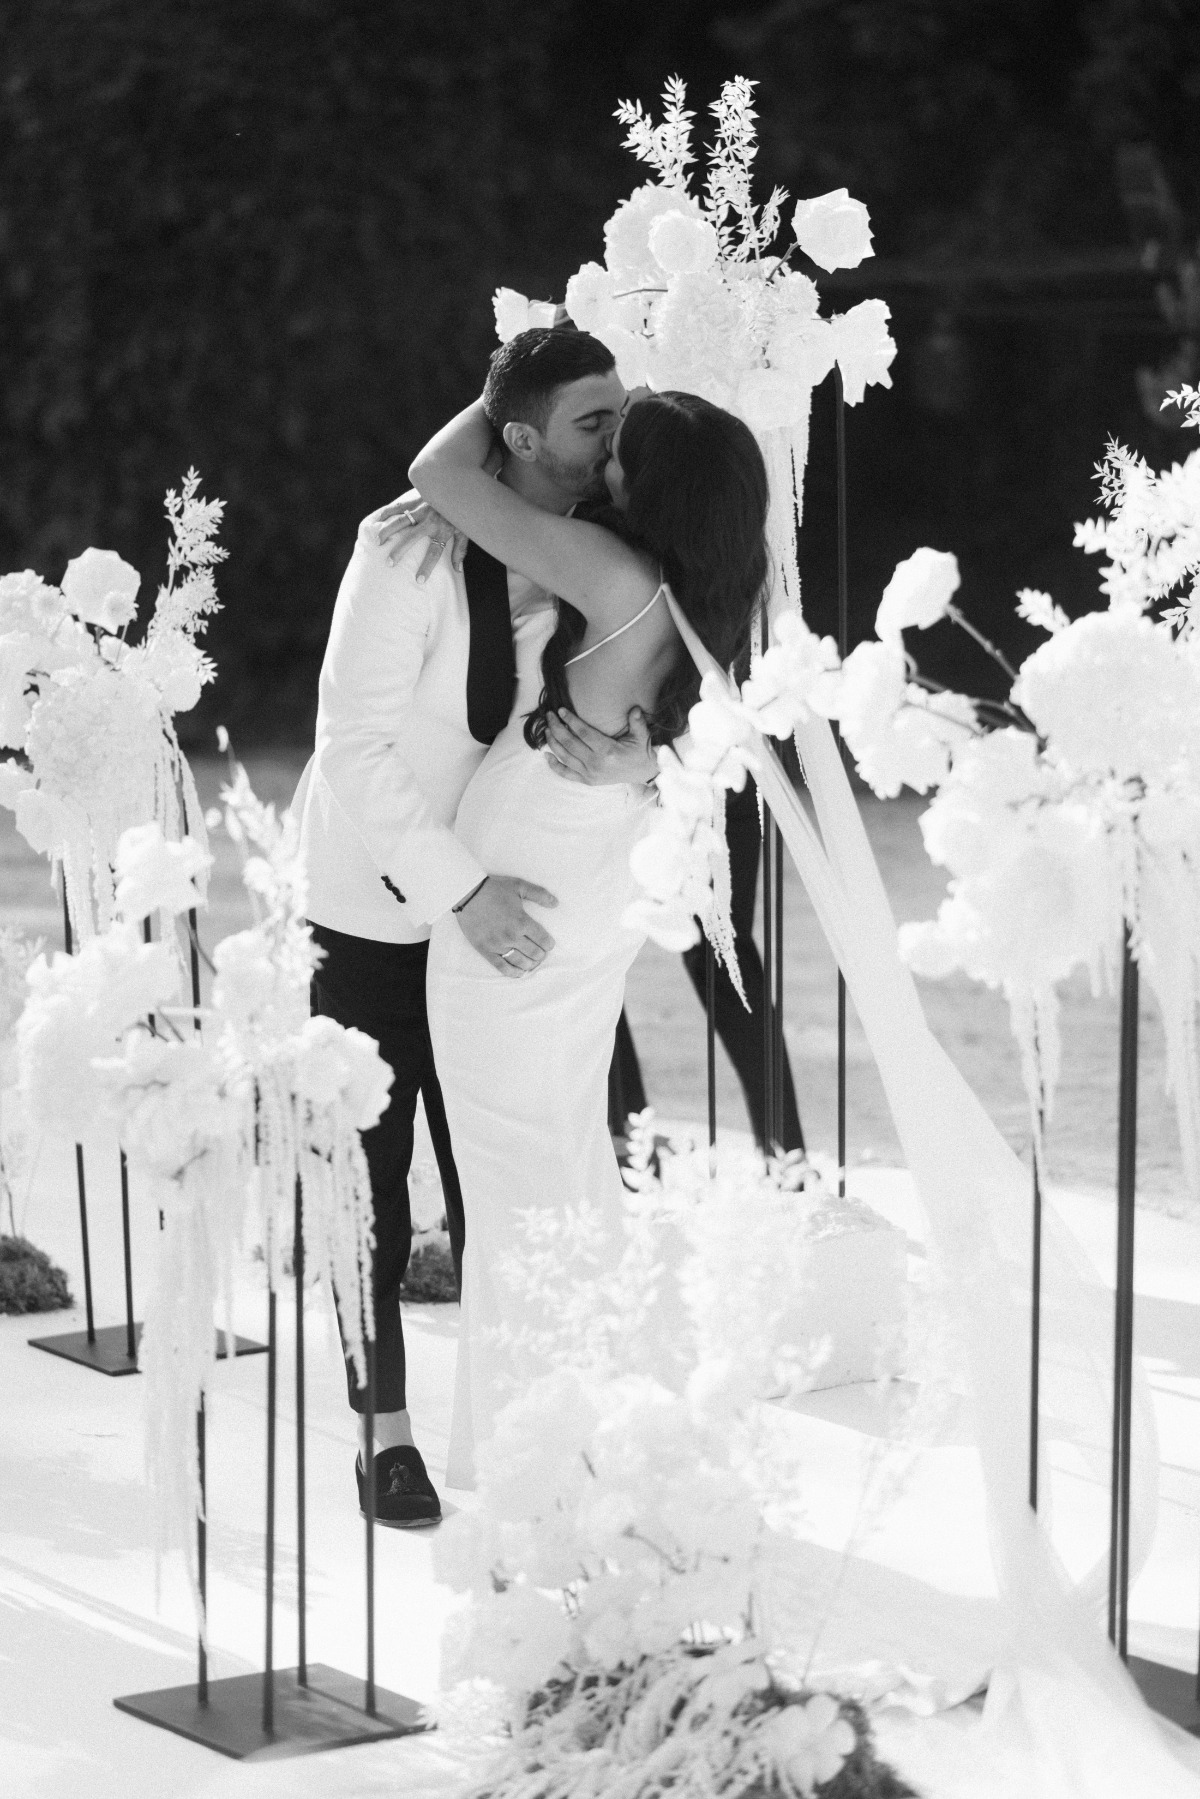 Groom kissing bride during ceremony surrounded by tall vases with white flowers